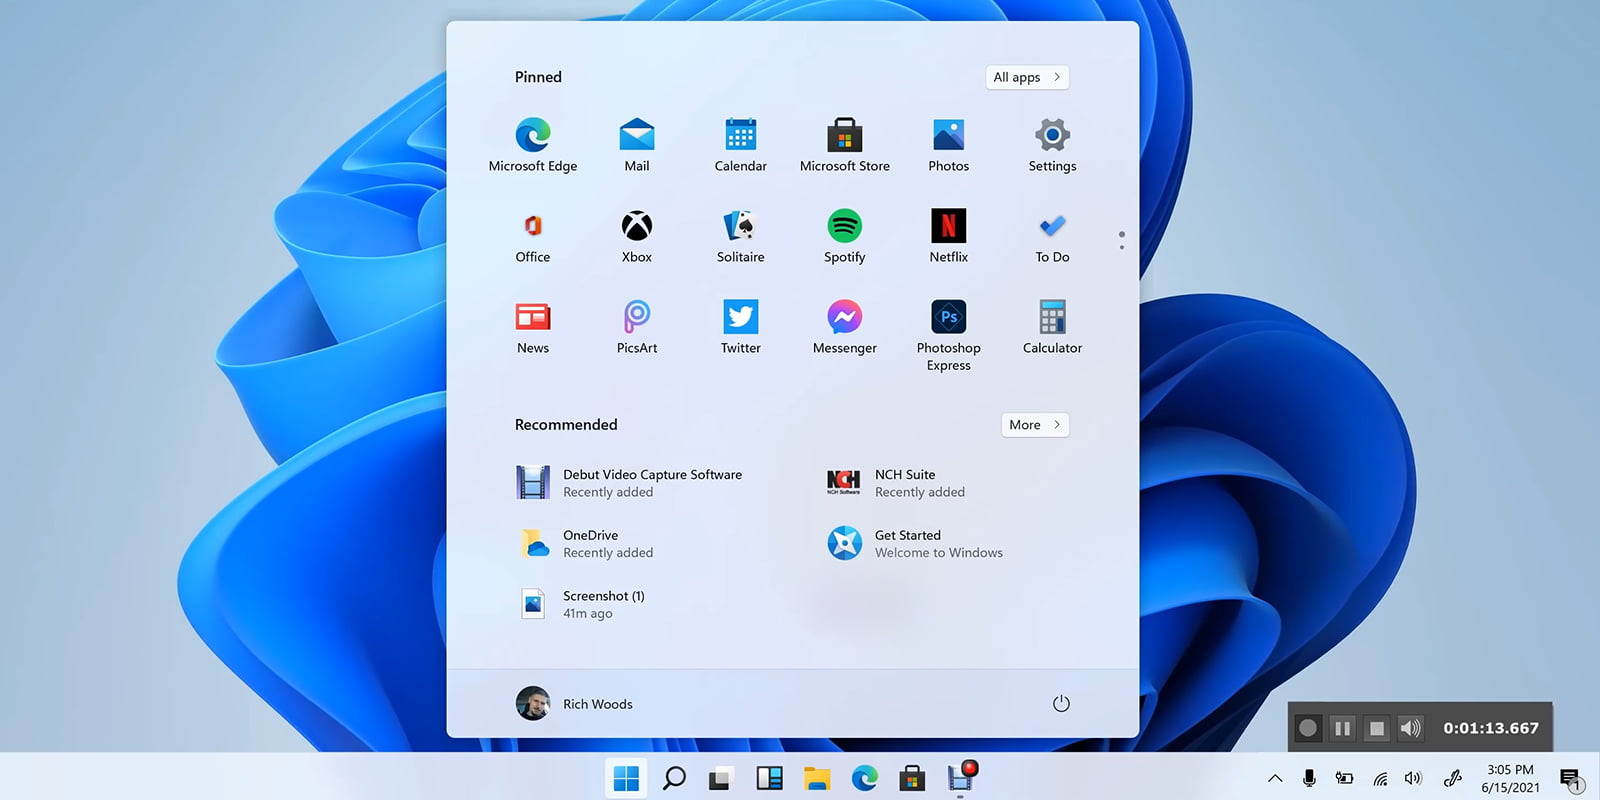 Windows 11 Leaked Ui Shows Visual Overhaul, Redesigned Icons, And Other Changes